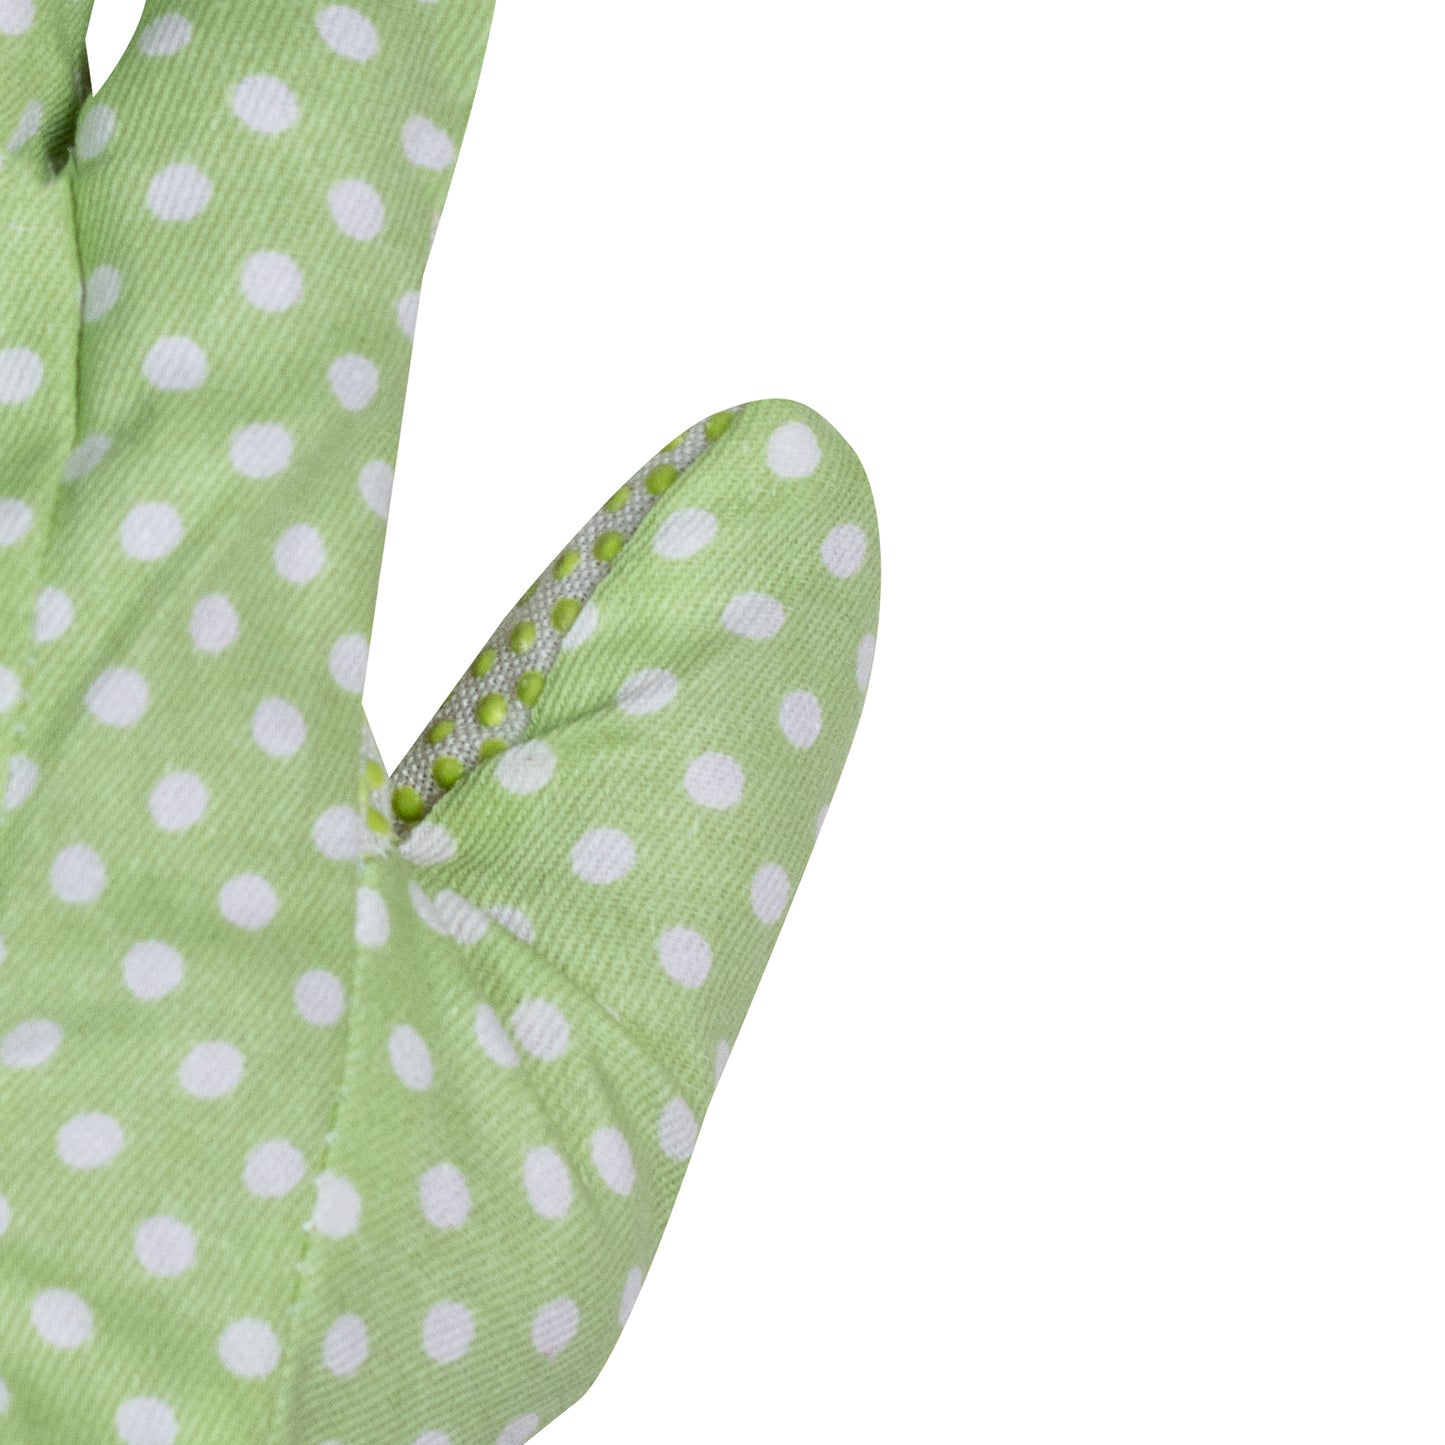 100% Cotton gardening glove in pastel polka dots with PVC dots on the palm for grip